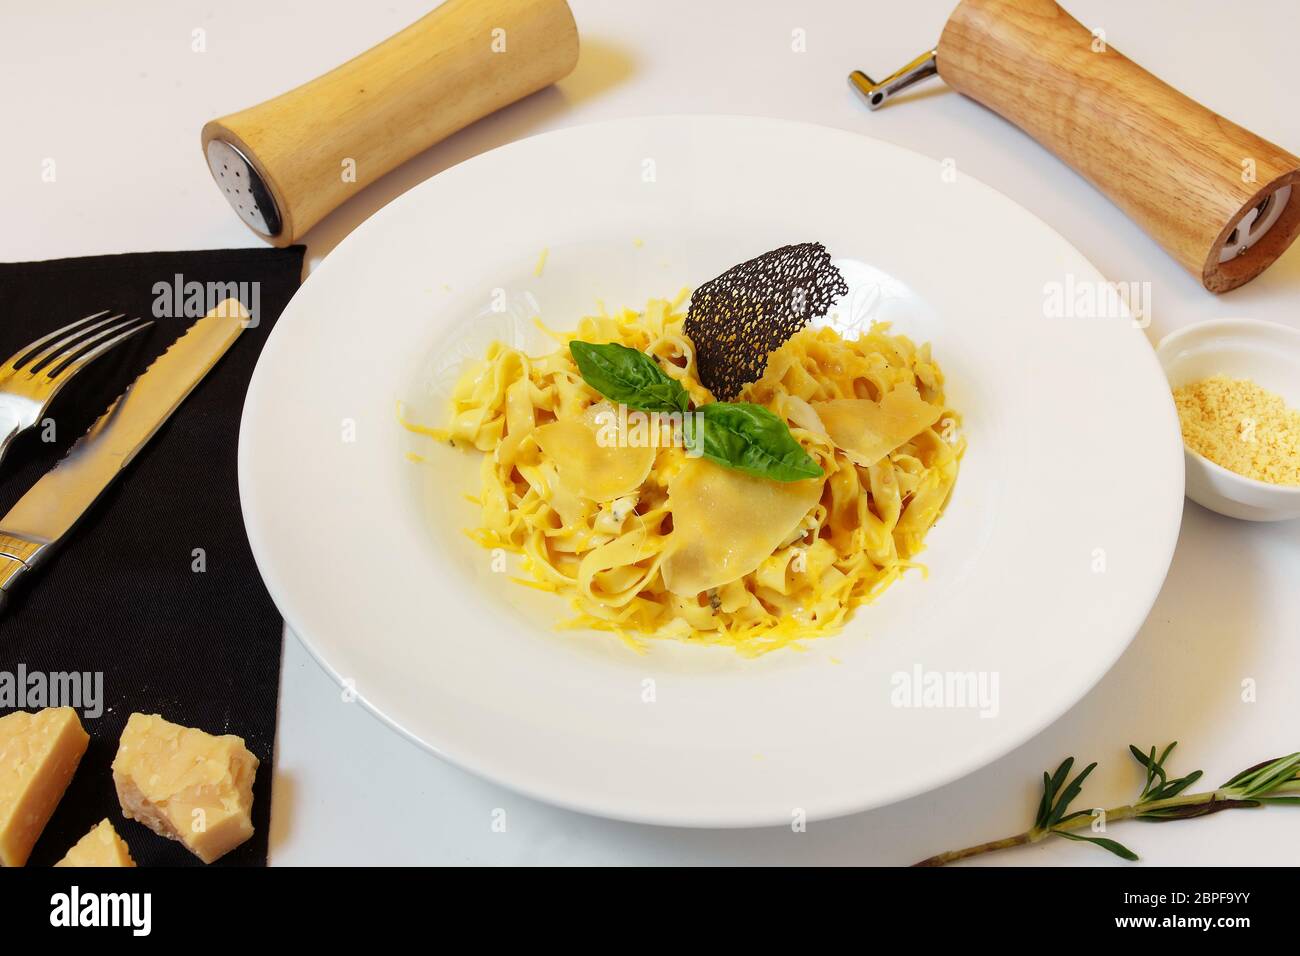 Pasta four cheeses. Homemade pasta, cream cheese sauce, Dor Blue, Cheddar, Parmesan, basil. Italian food. On a wooden background. Free space for text Stock Photo